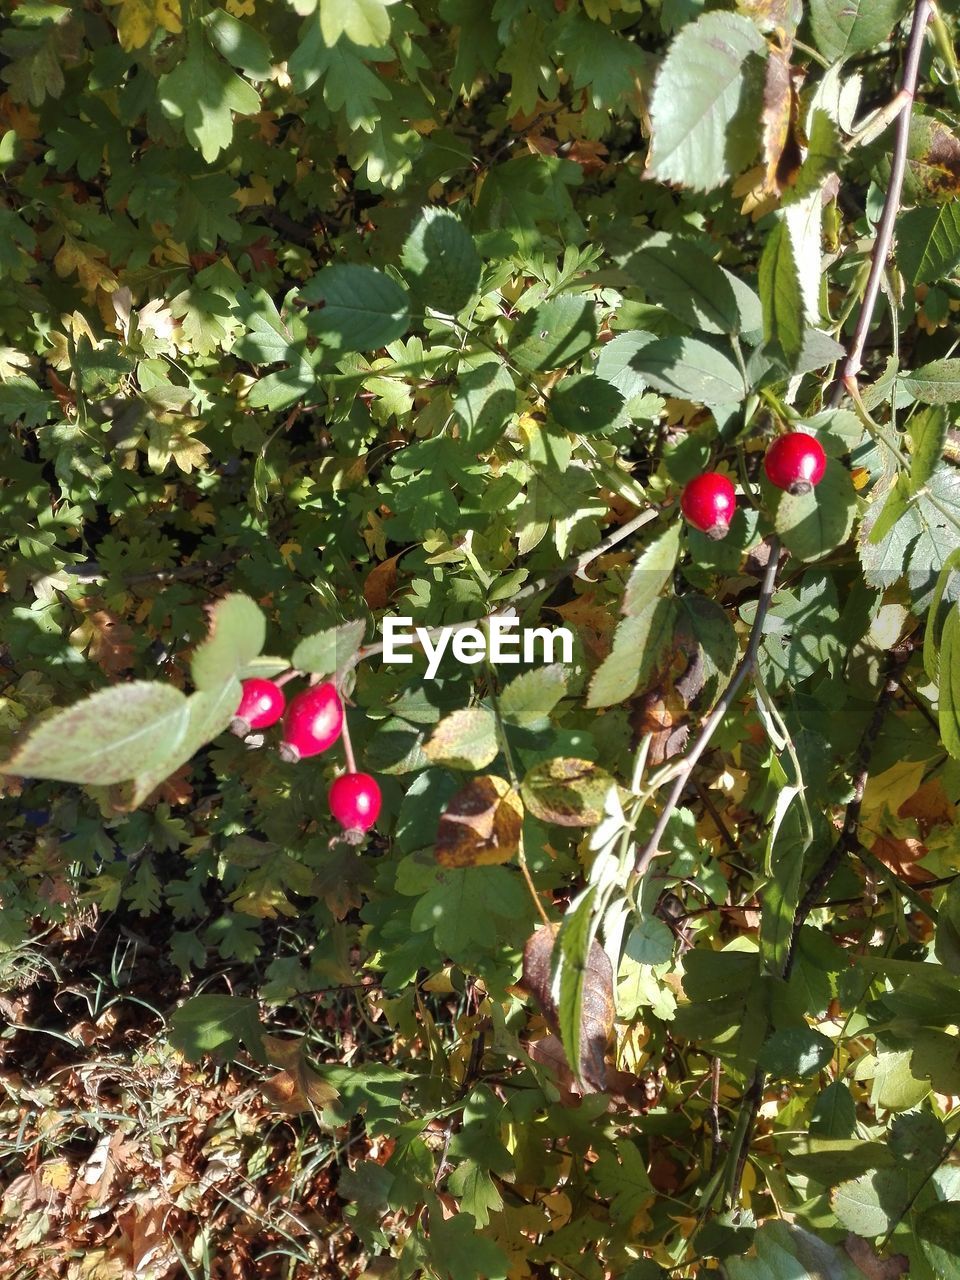 CLOSE-UP OF RED BERRIES ON TREE AGAINST PLANTS